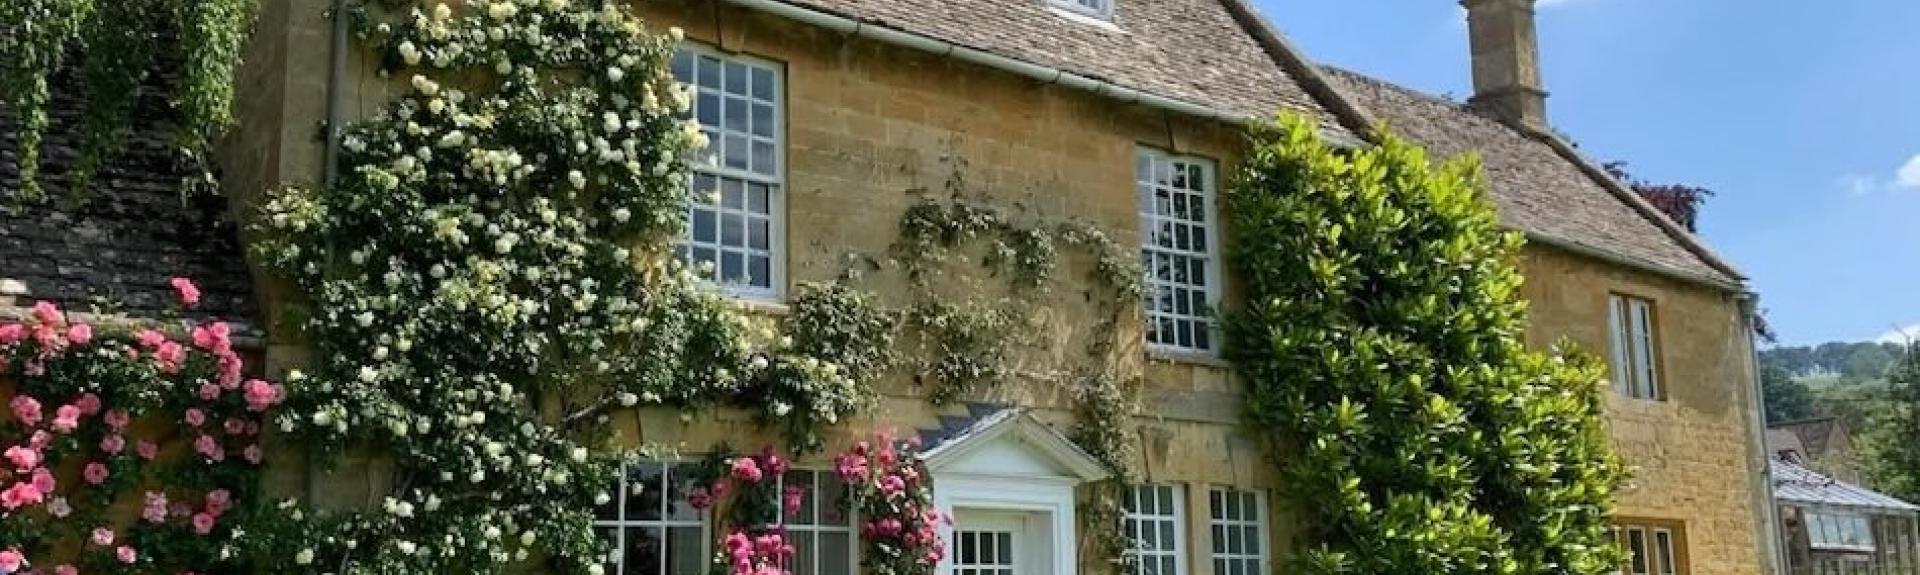 A stone-built house with roses and wisteria climbing the walls.